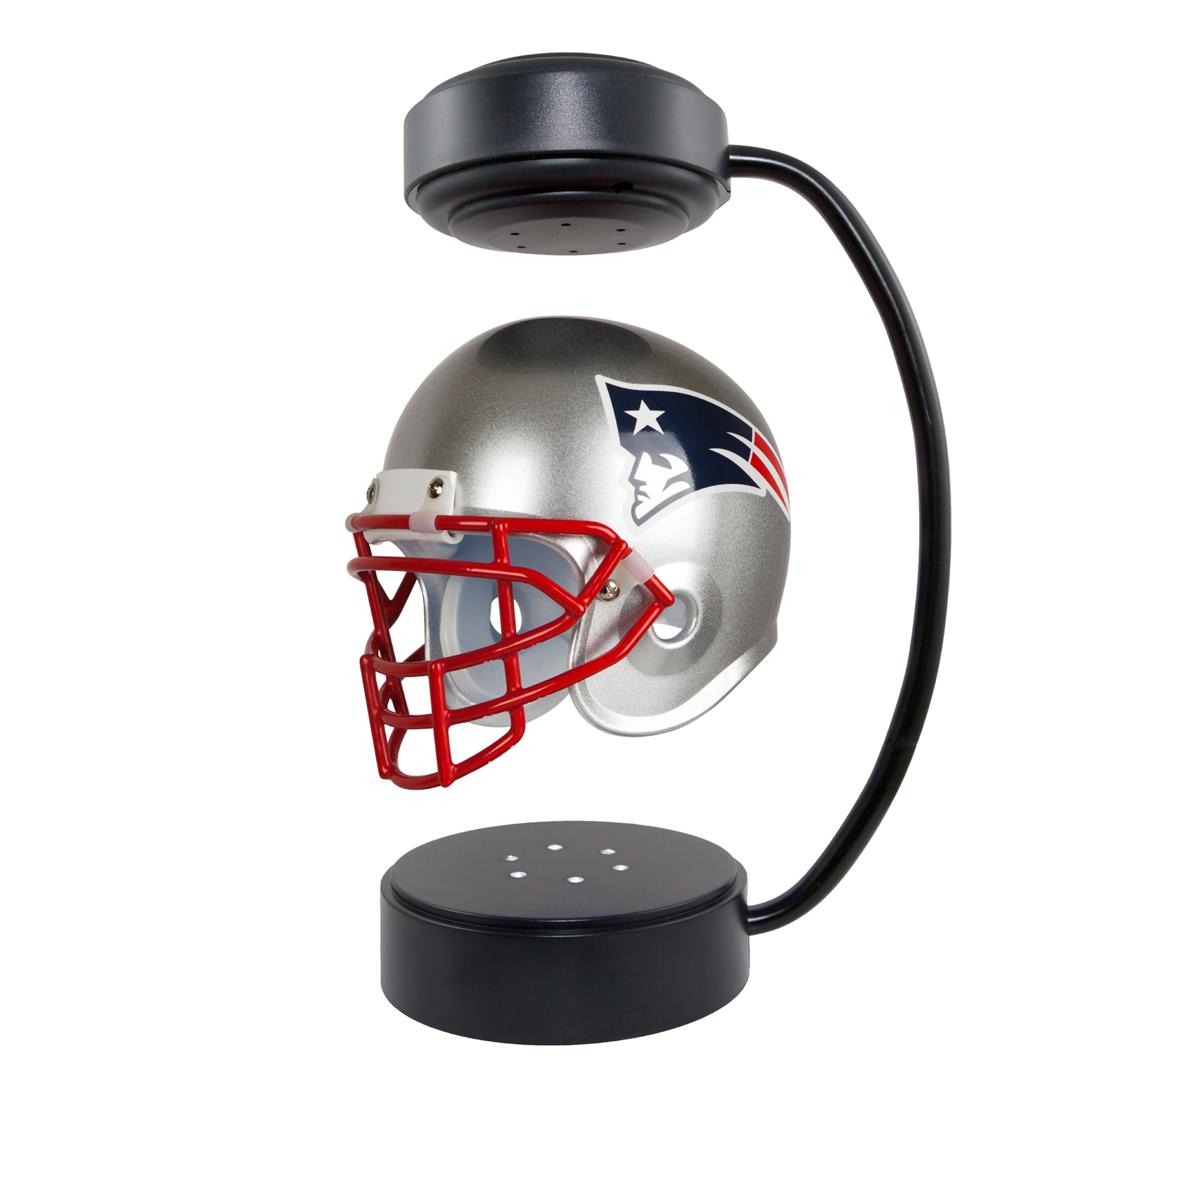 Officially Licensed NFL Hover Helmet by Pegasus Sports – goSASS